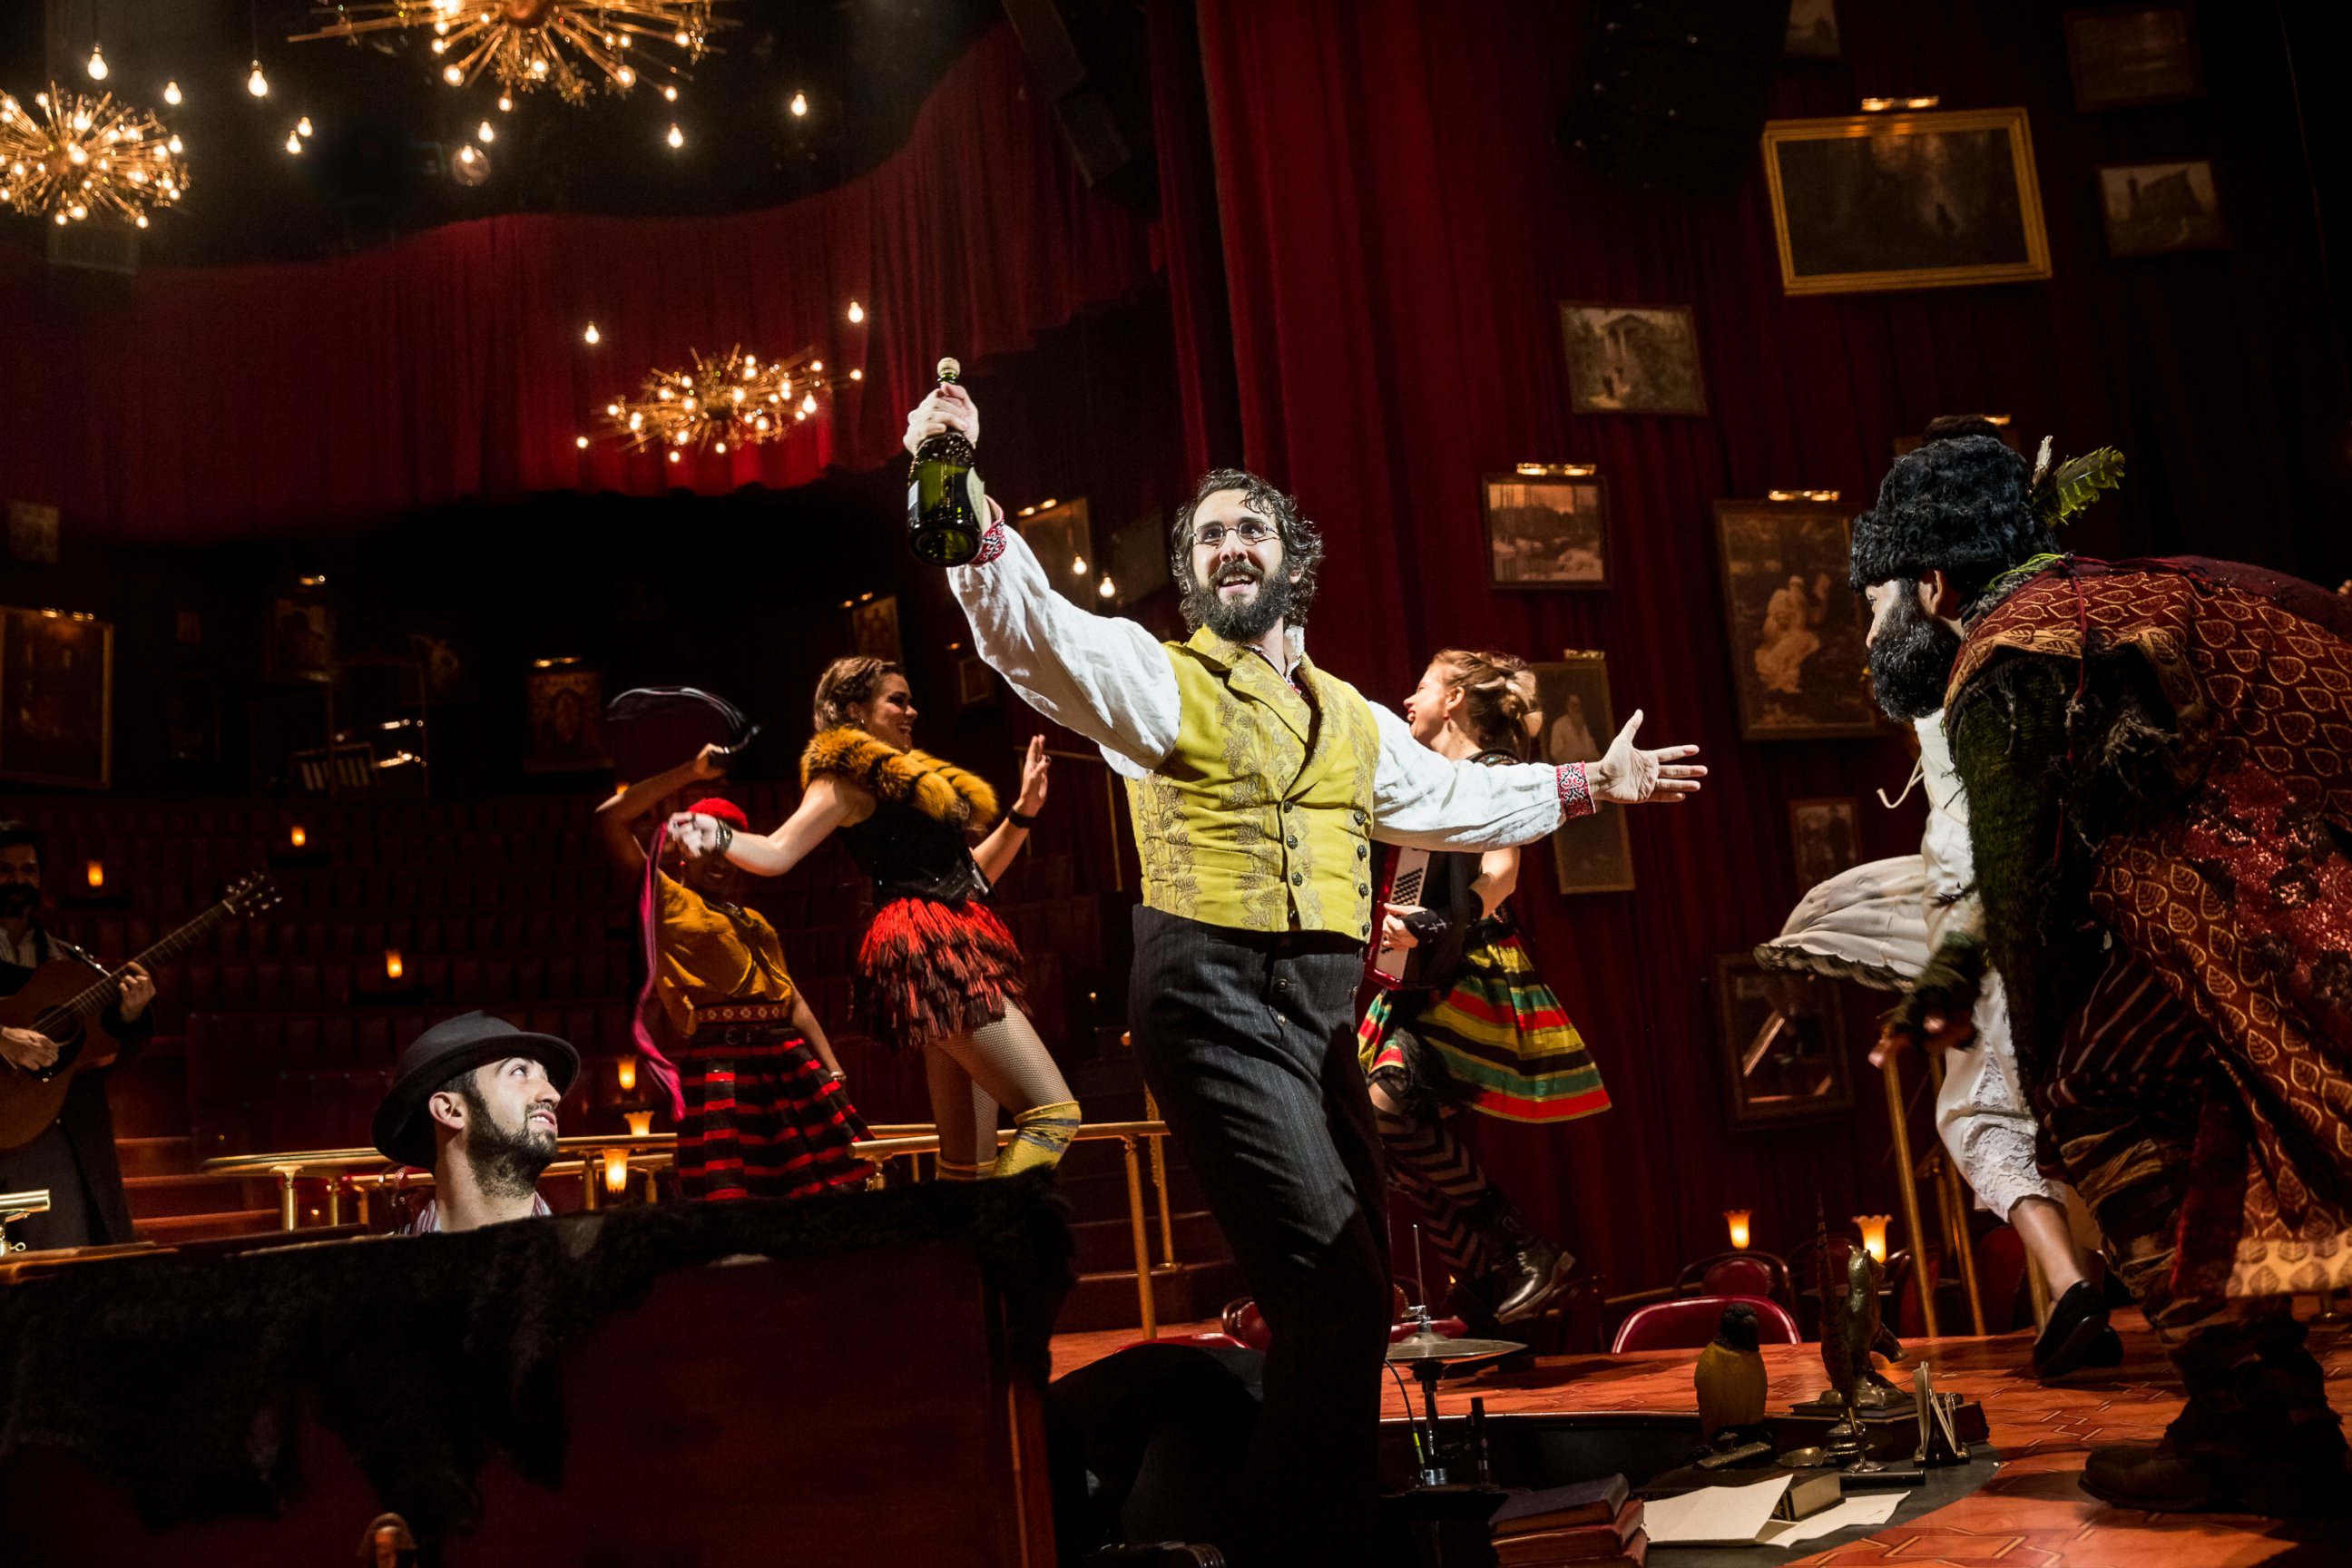 PHOTO: Josh Groban and the cast of "Natasha Pierre & The Great Comet of 1812" are seen here.